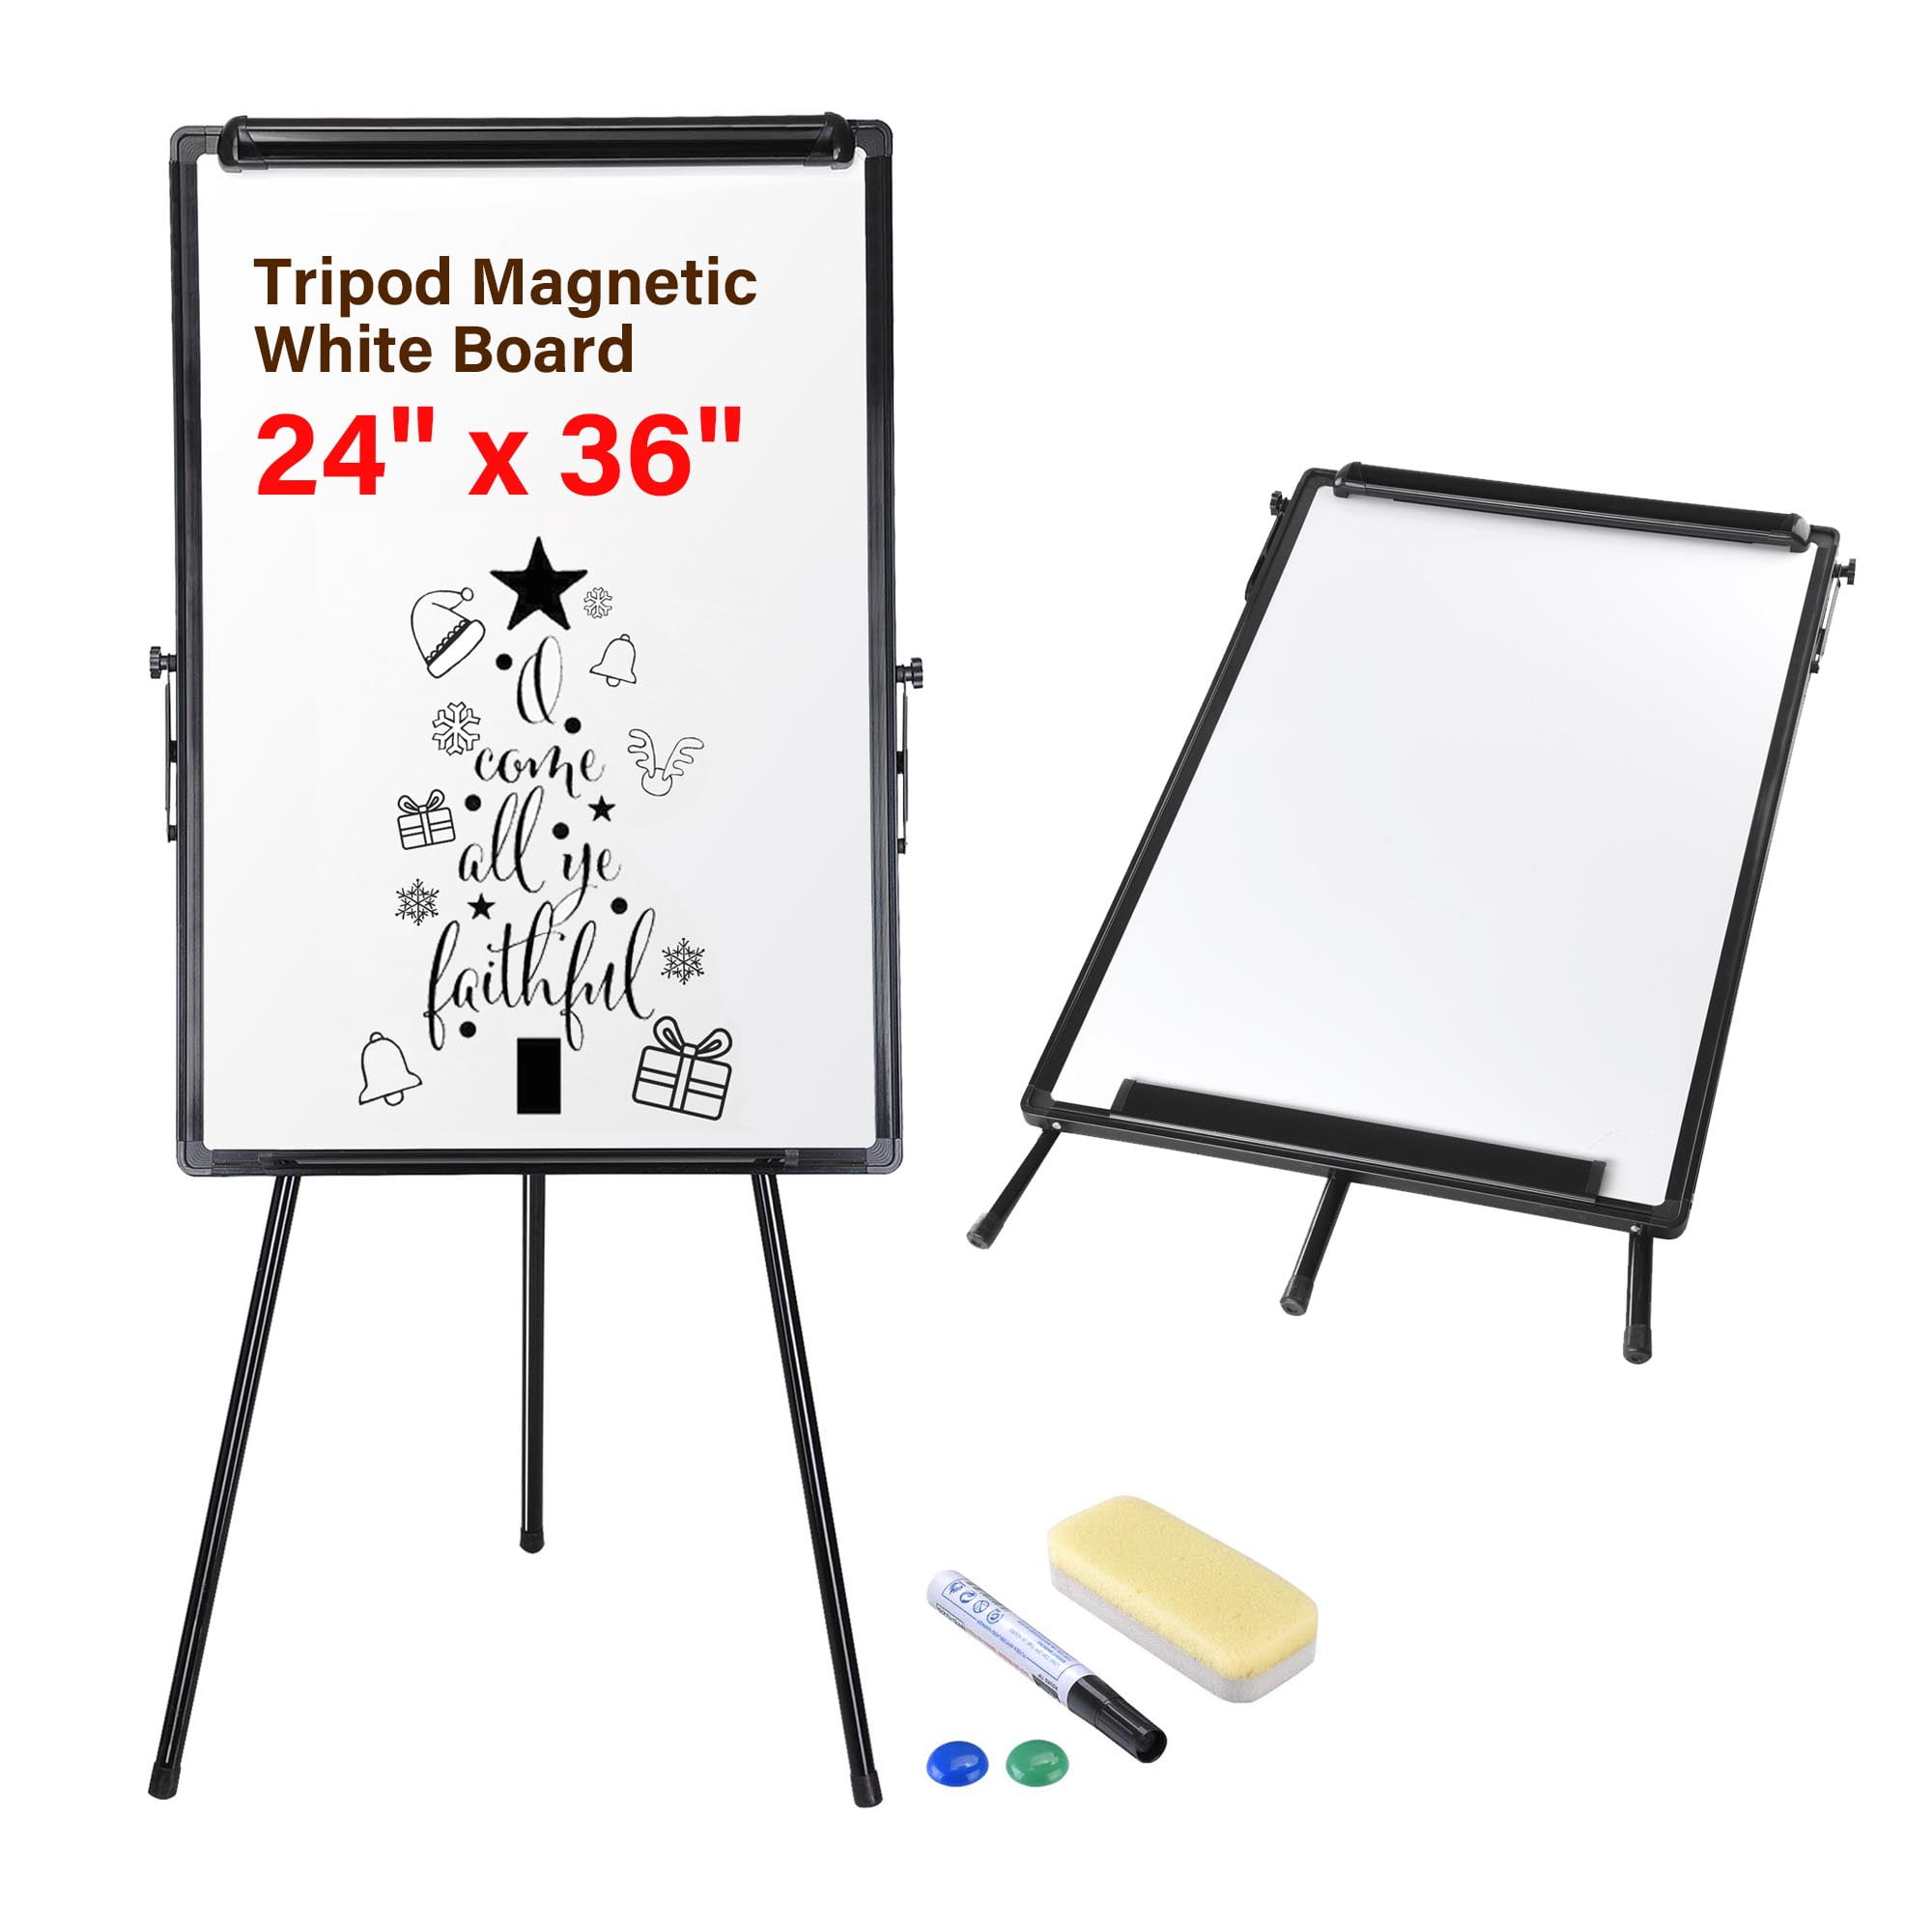 3 Markers Height Adjustable Tripod Whiteboard with 1 Eraser White Board Easel 6 Magnets Magnetic Dry Erase Board 36 x 24 inches Flipchart Easel Whiteboard White 